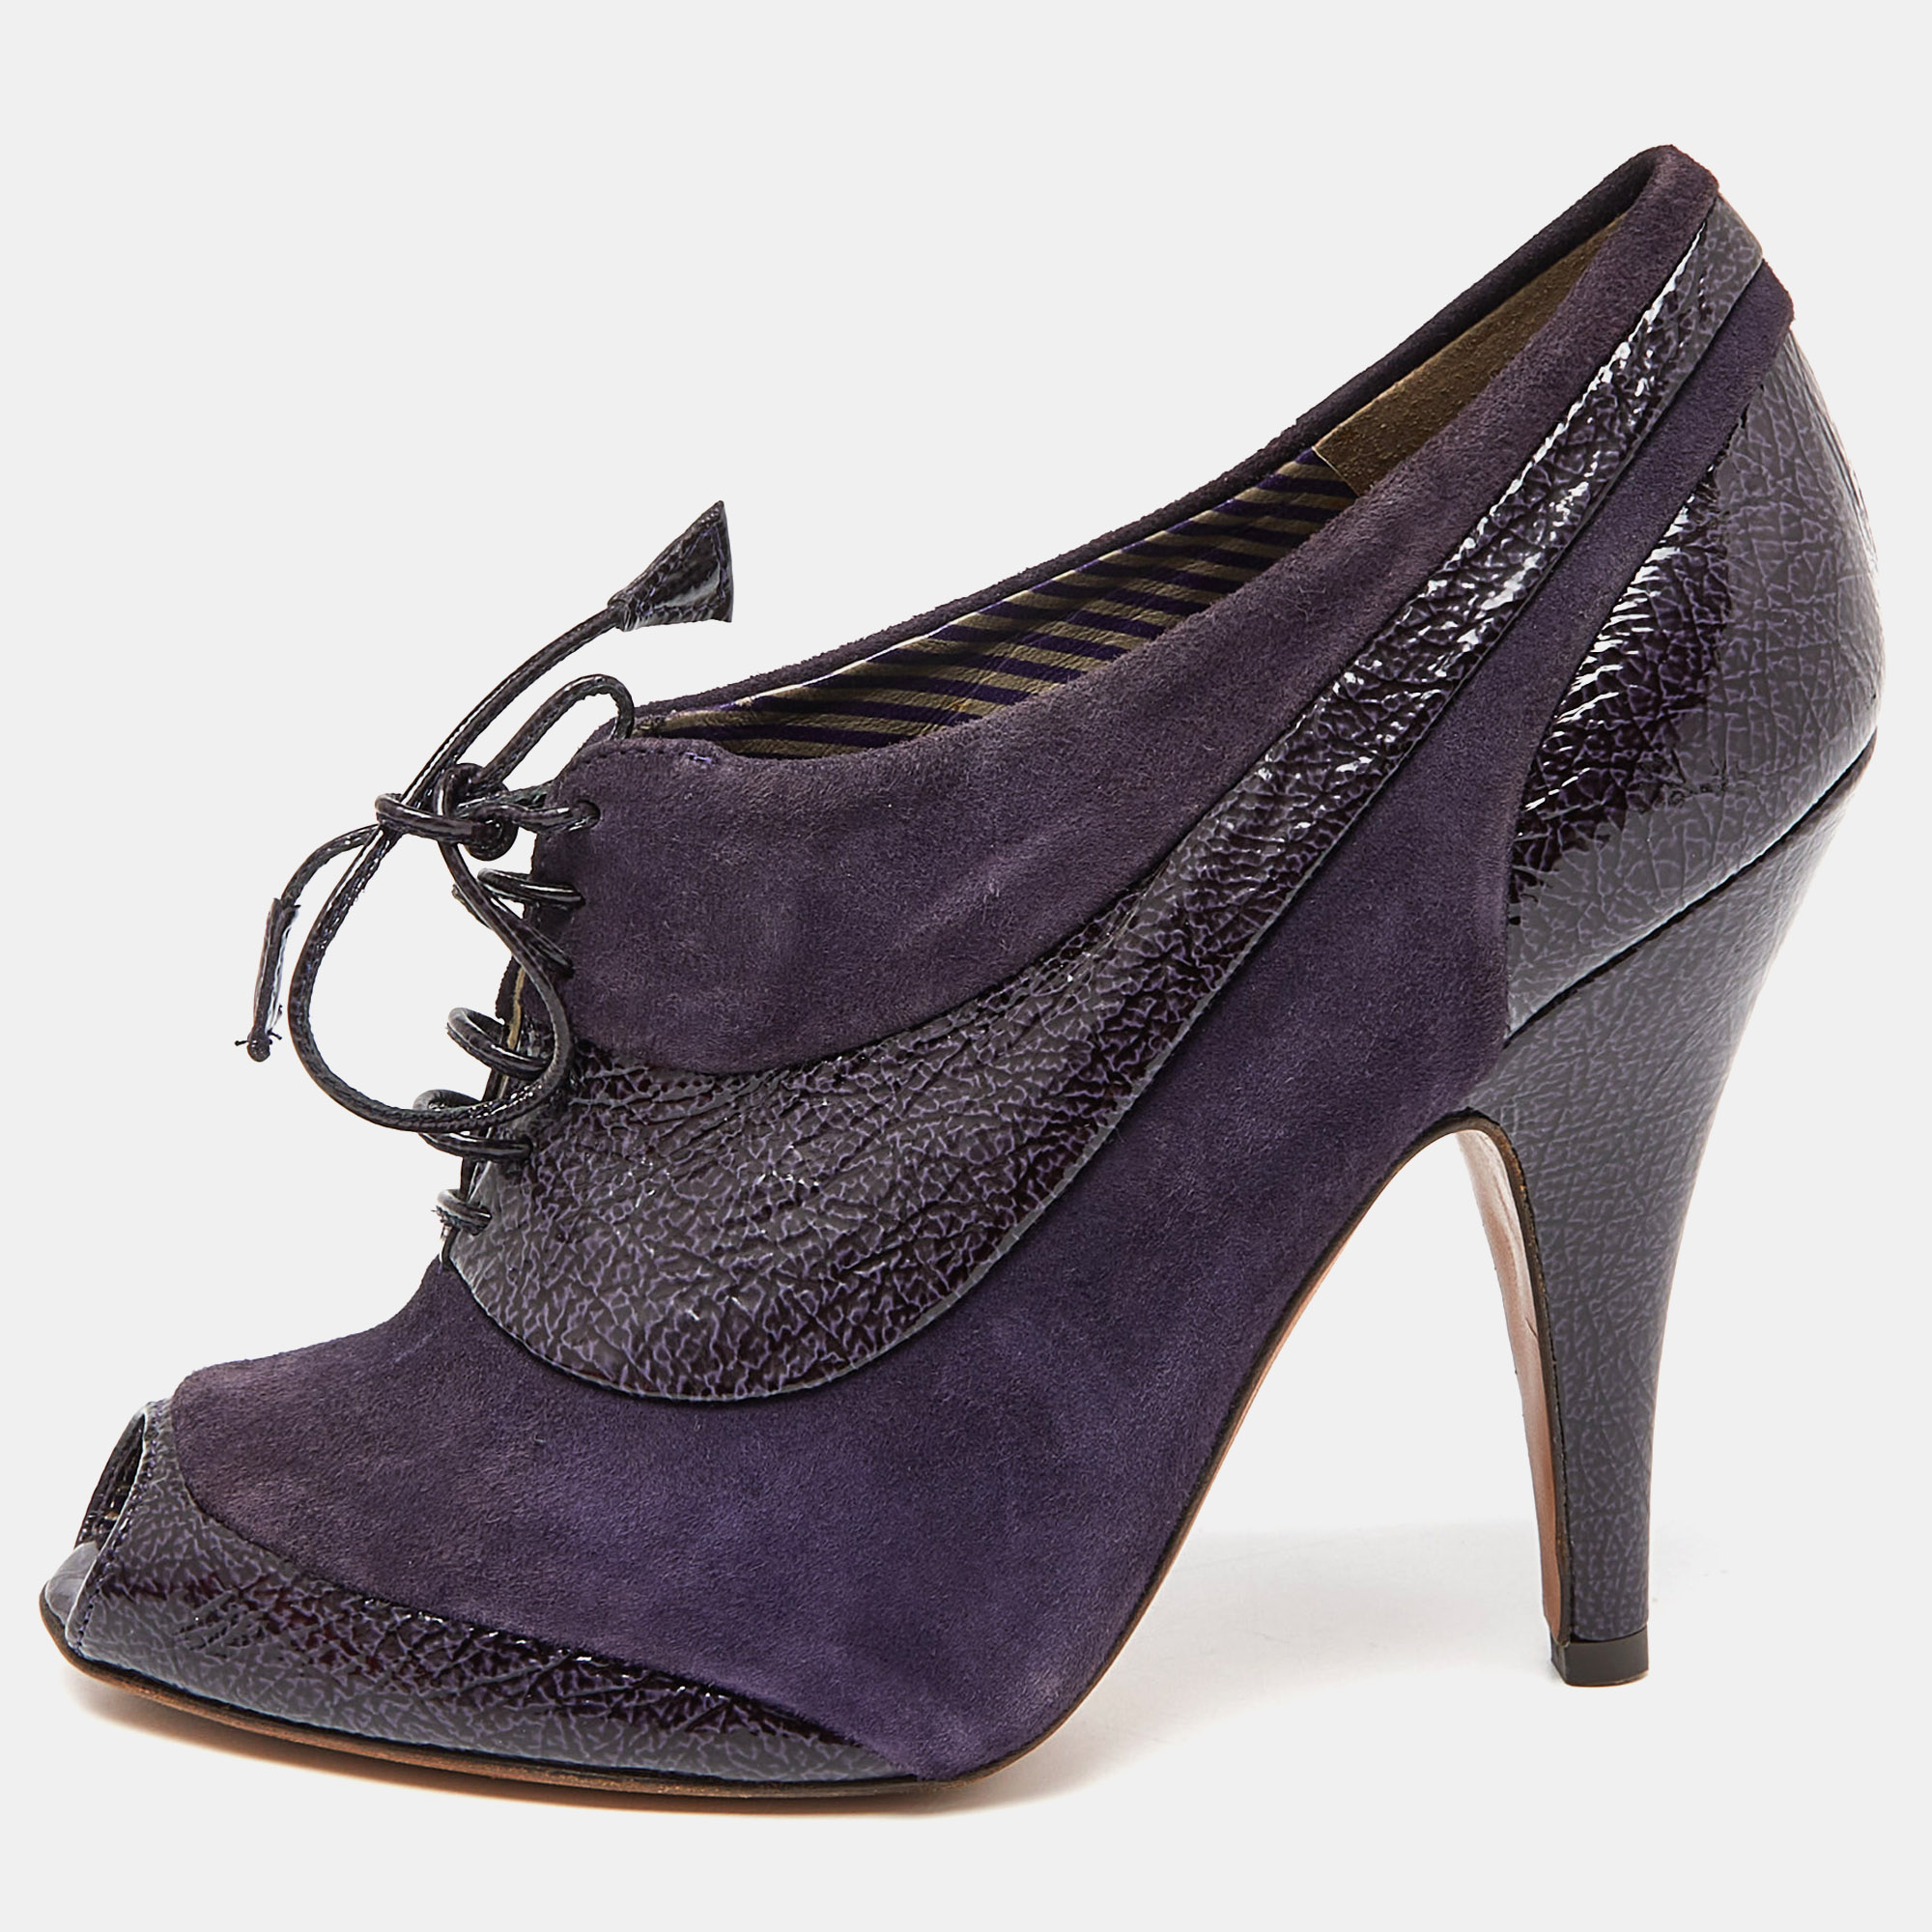 Pre-owned Moschino Purple Suede And Textured Leather Lace Up Peep Toe Ankle Booties Size 37.5